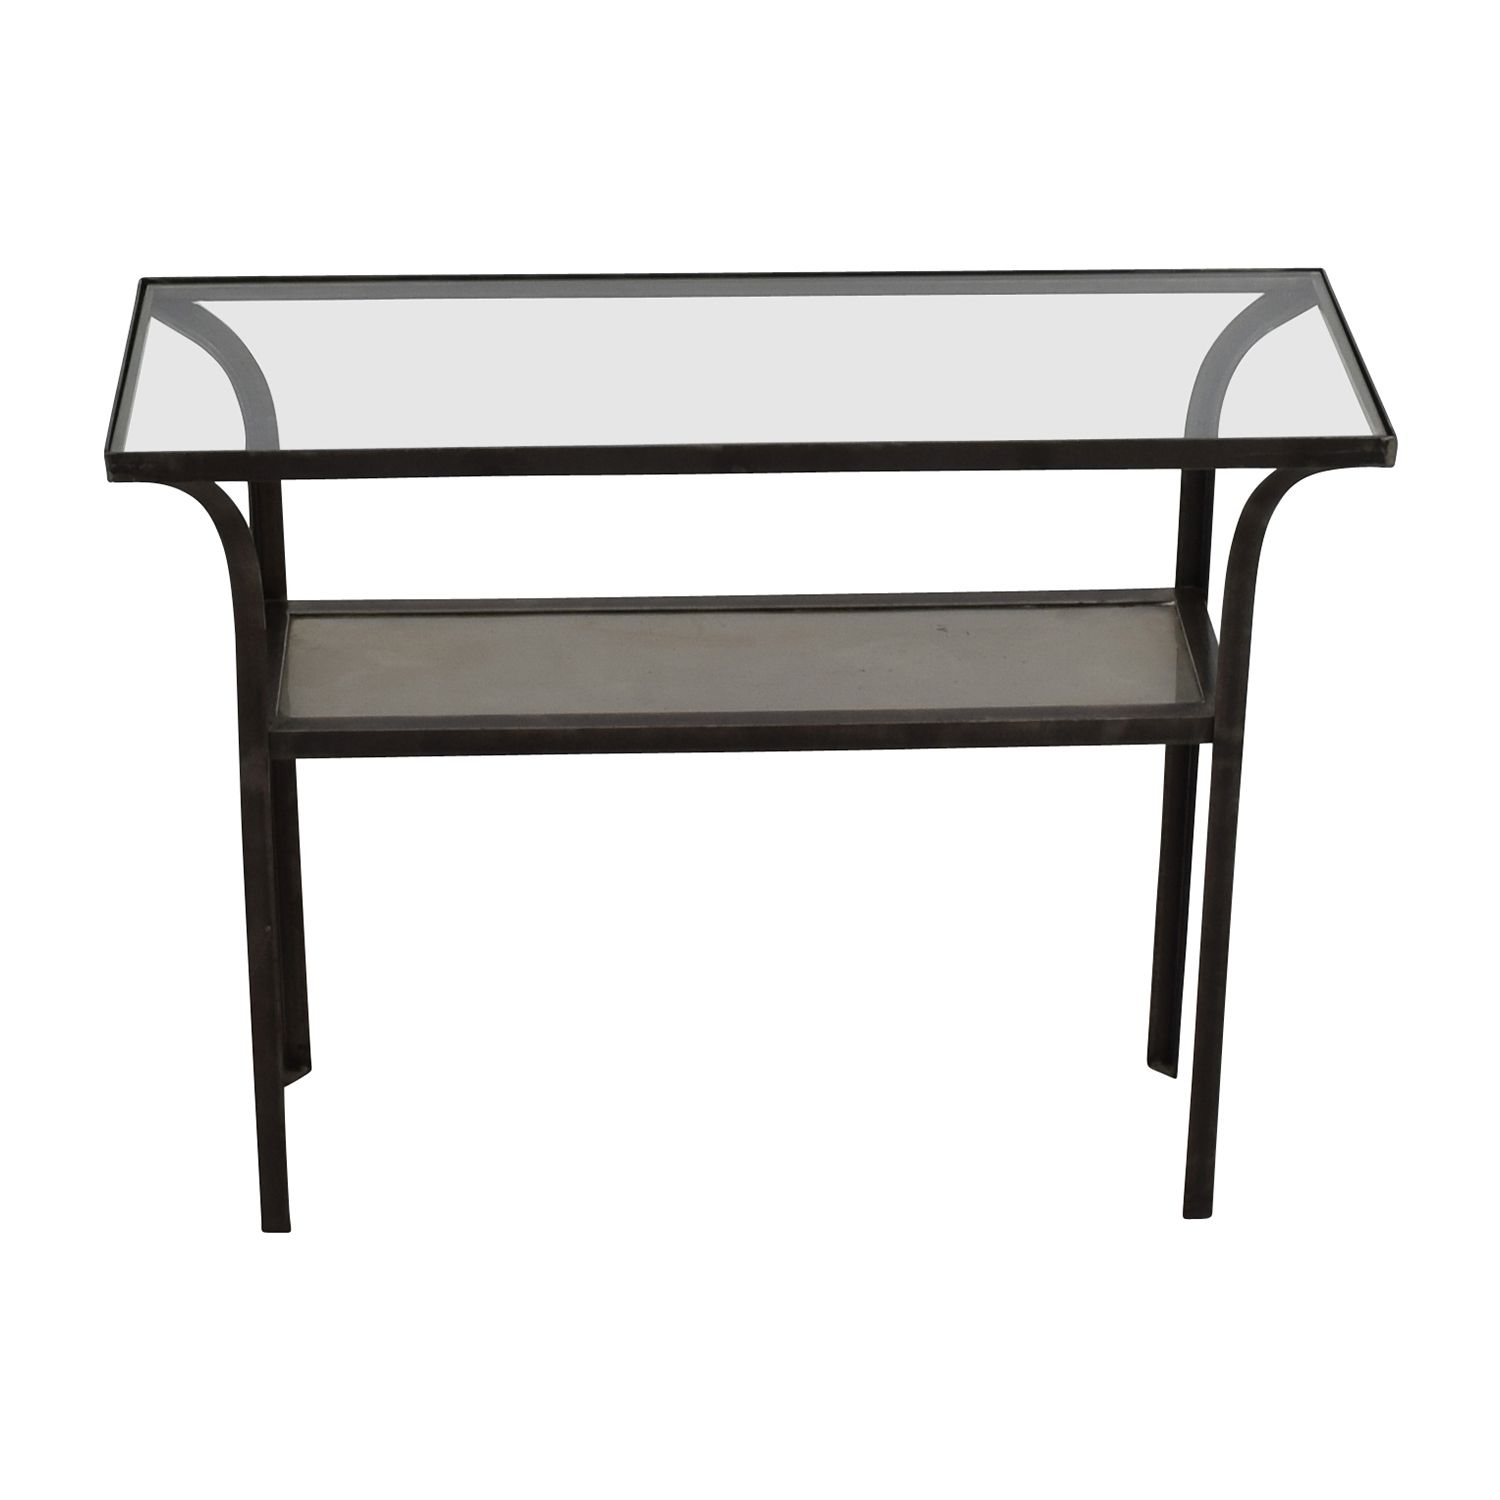 Black Sofa Table With Glass Top – Brooklyn Apartment Intended For Black Round Glass Top Console Tables (View 9 of 20)